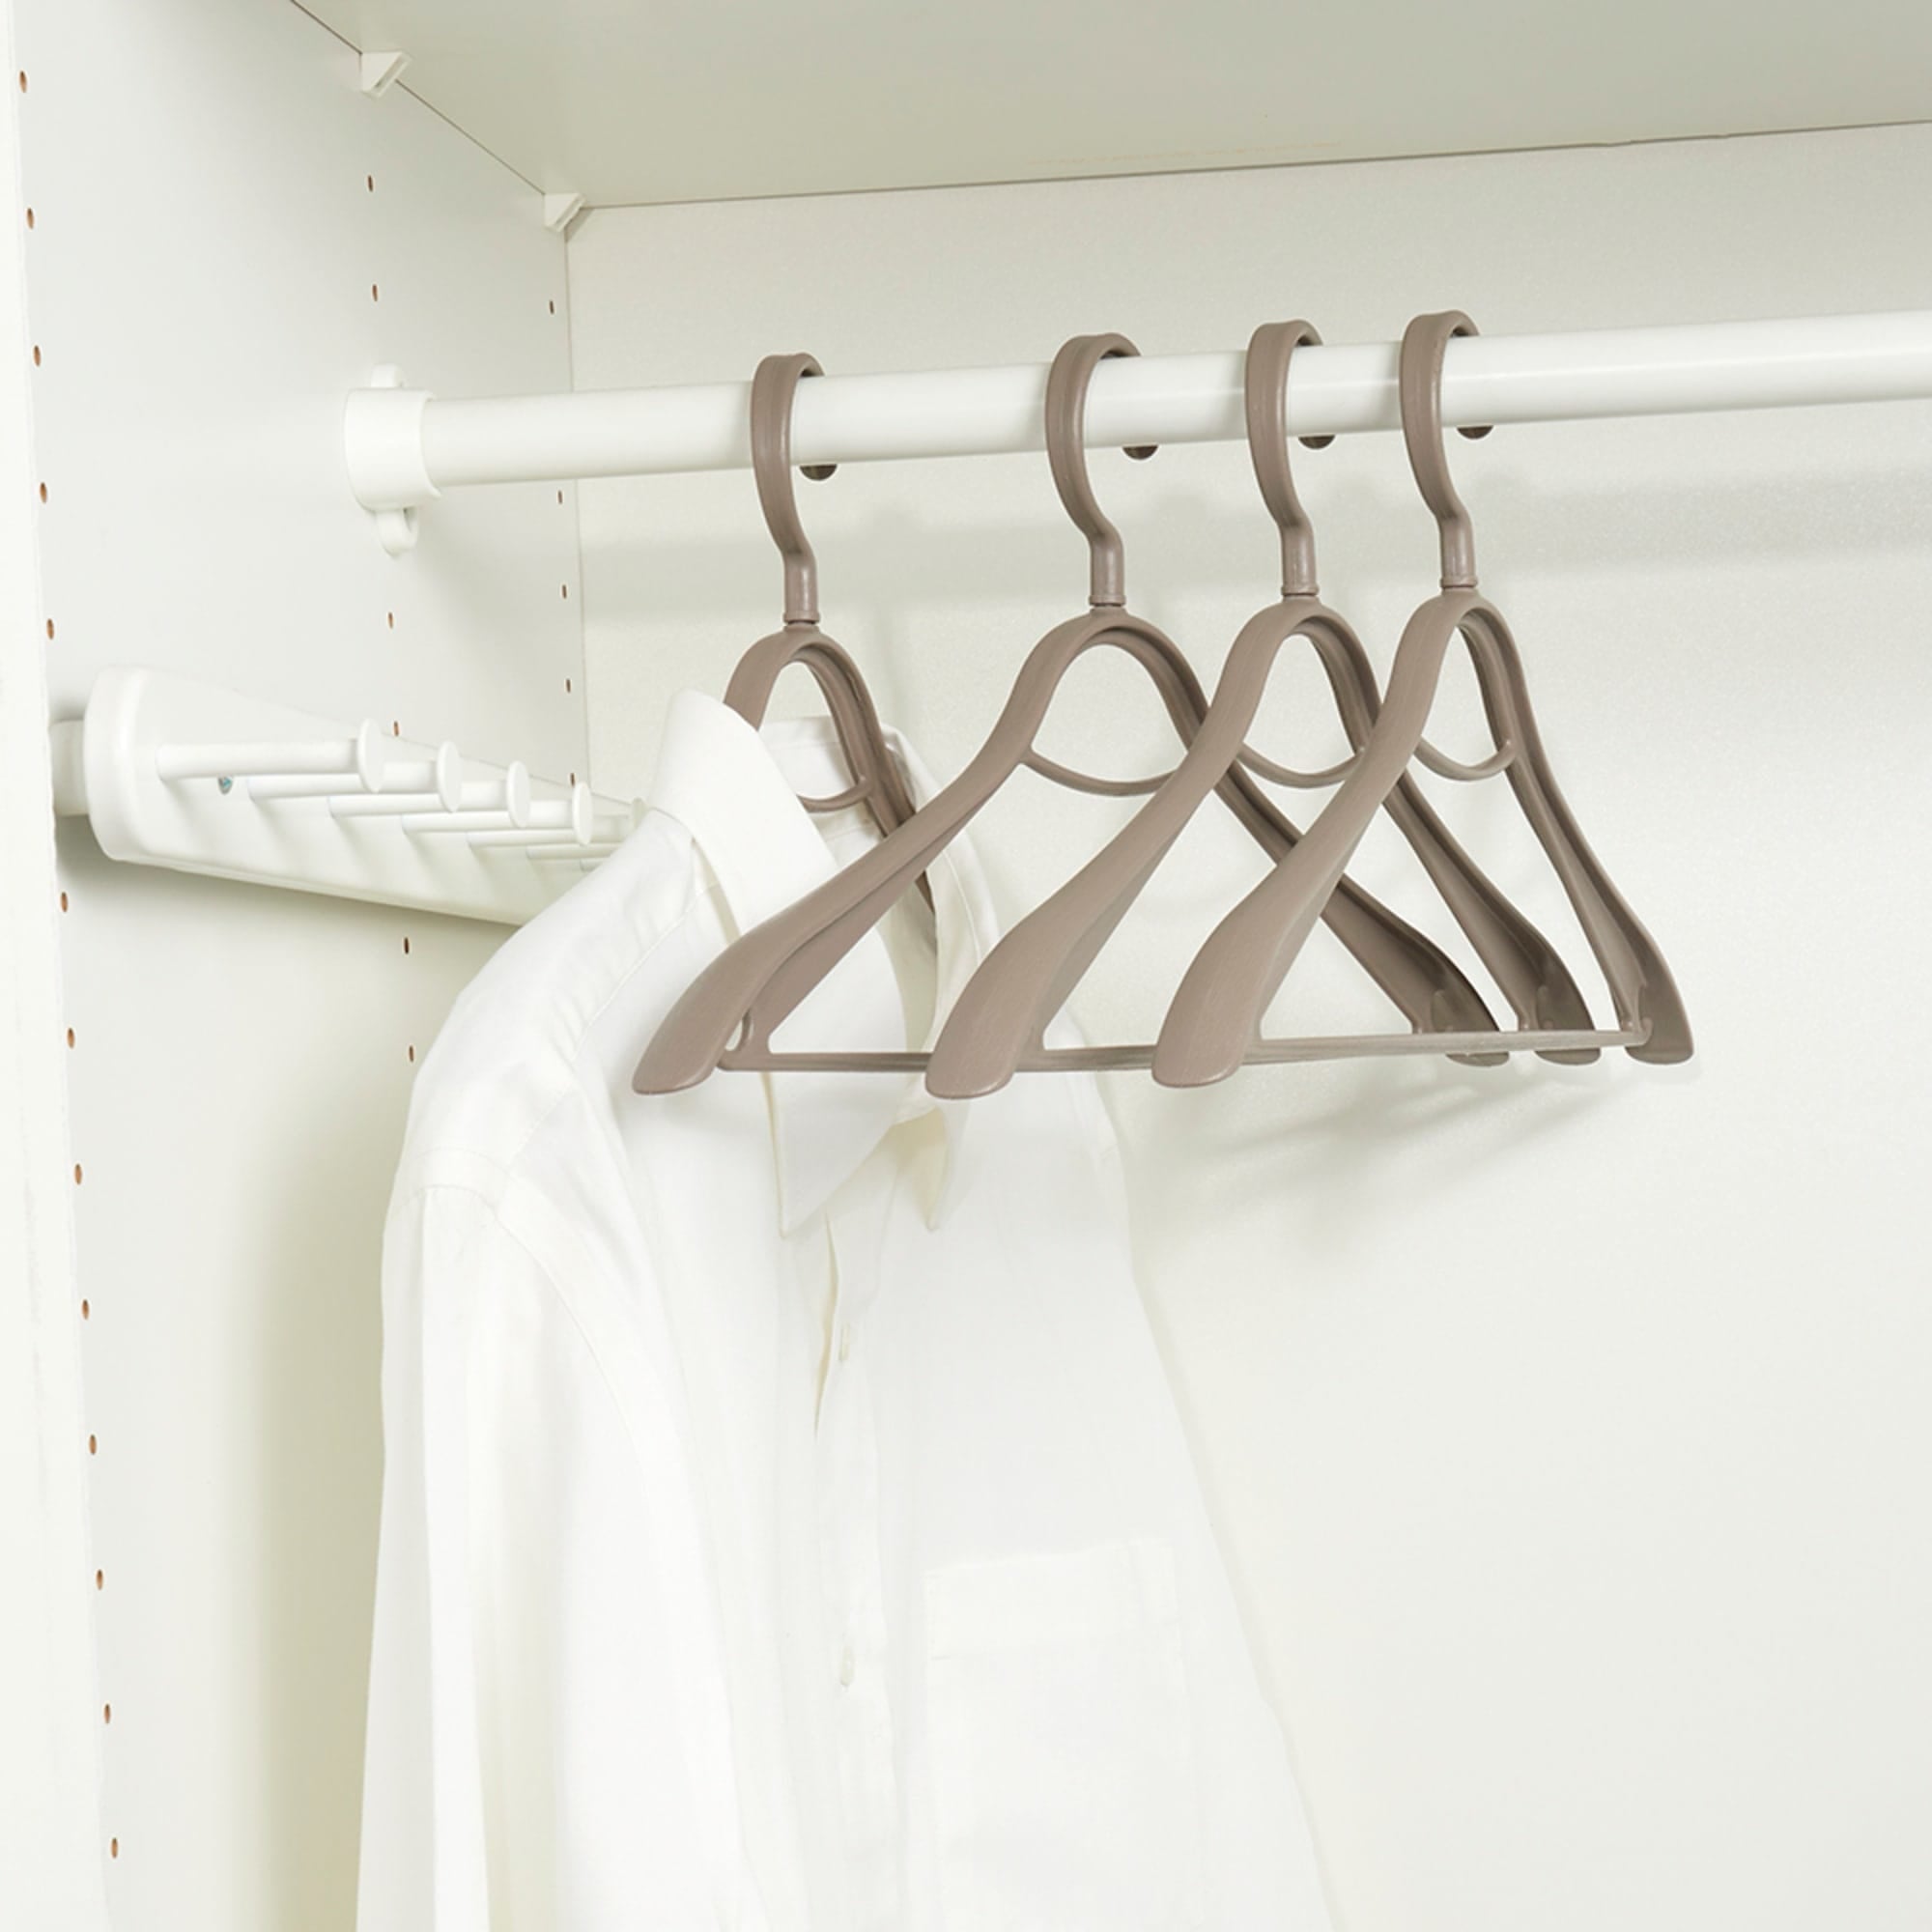 Home Basics Plastic Hangers, (Pack of 4), Timber Taupe $5 EACH, CASE PACK OF 12